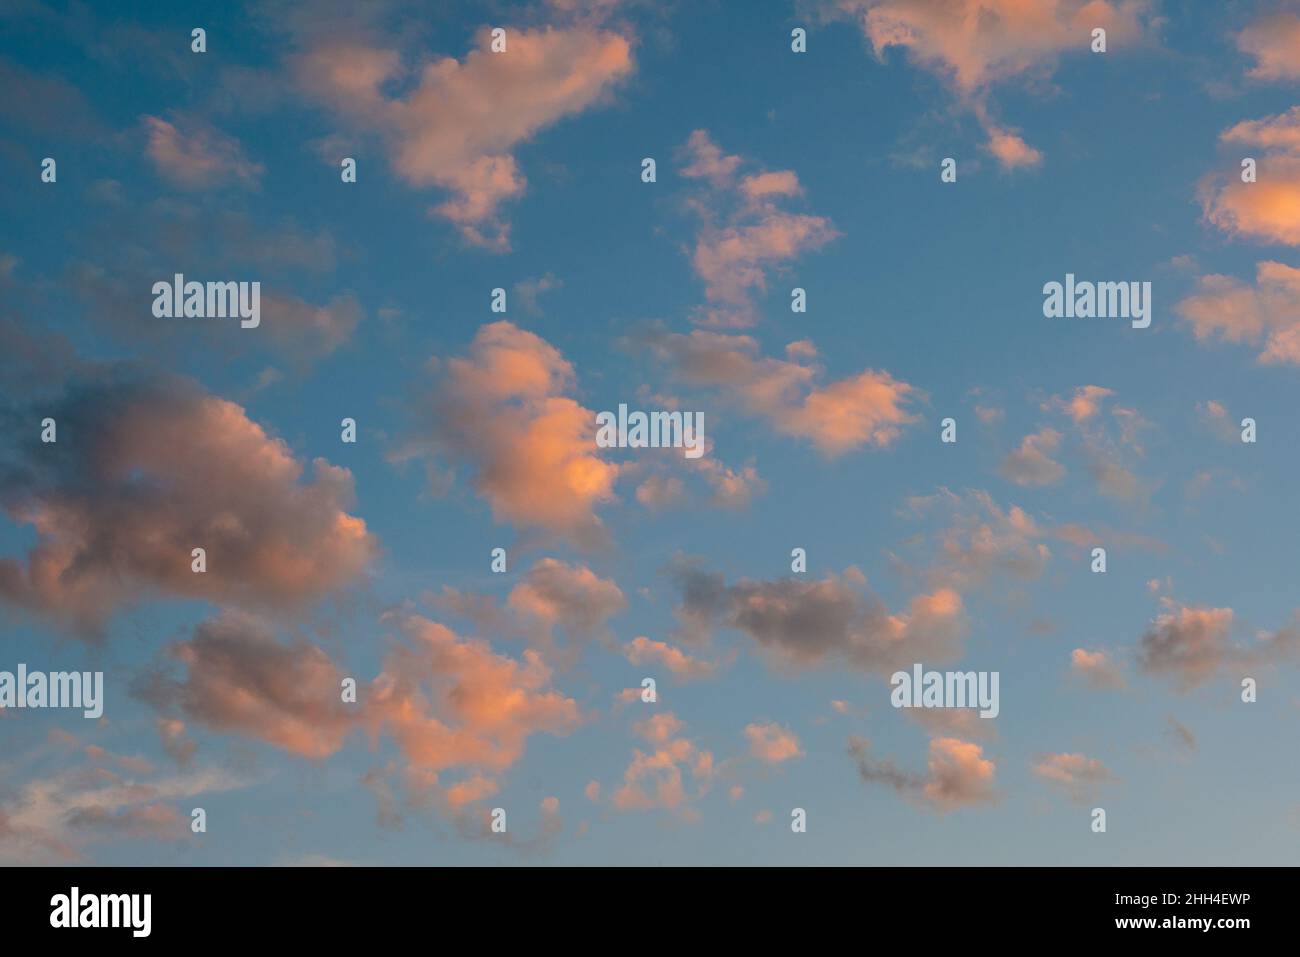 relaxing sunrise cloudscape sky with pink black and white coloured cumulus cloud formation in a pastel blue sky. Sunset or sunrise background image Stock Photo